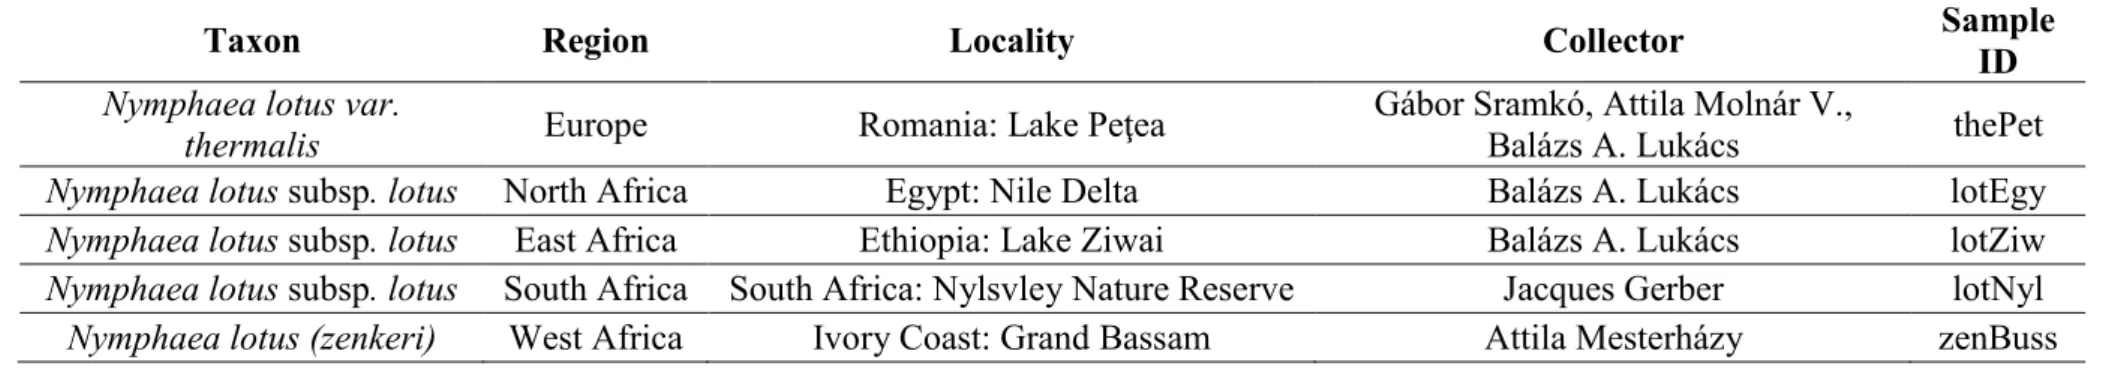 Table S1. Details of samples collected for this study including taxon name, geographic region and exact locality